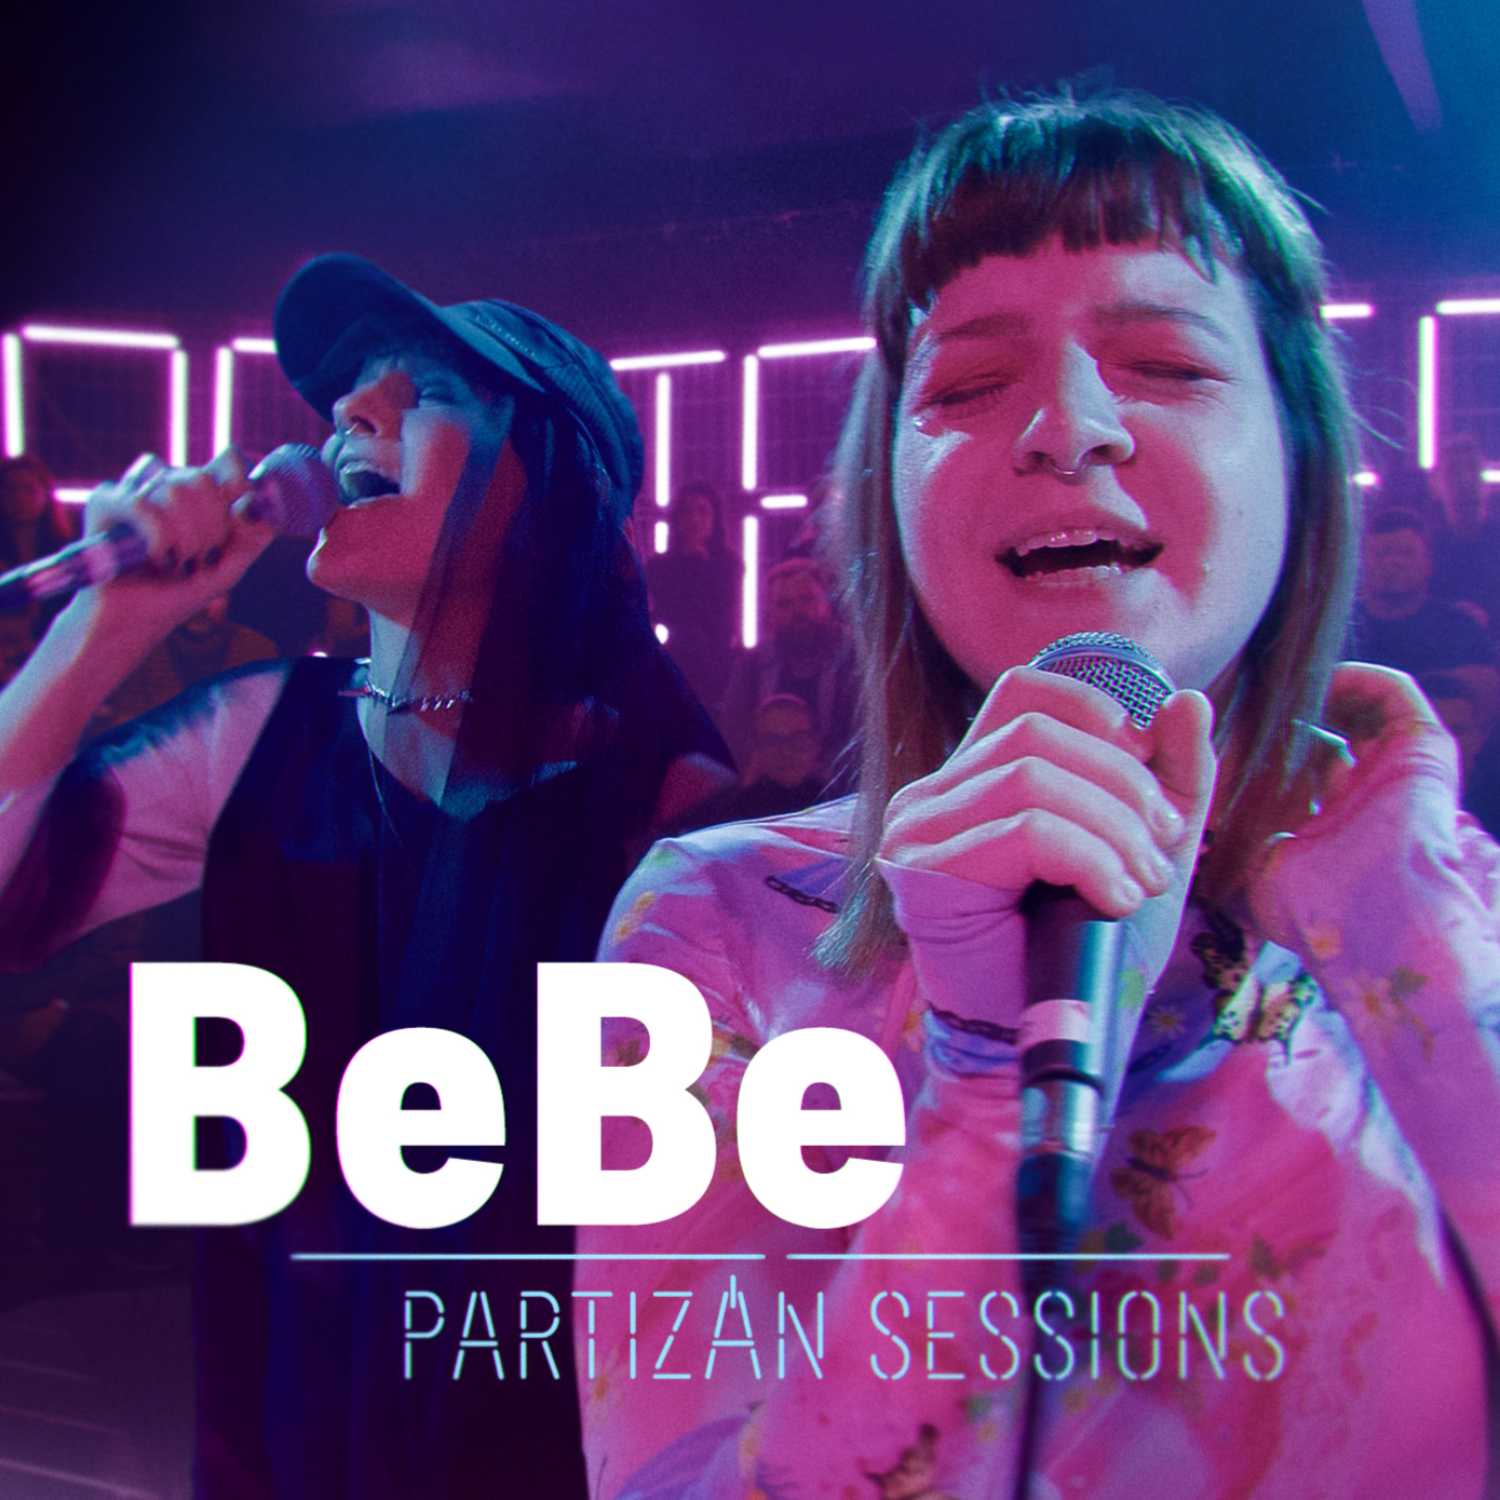 BeBe - BeBe here for you | Partizán Sessions